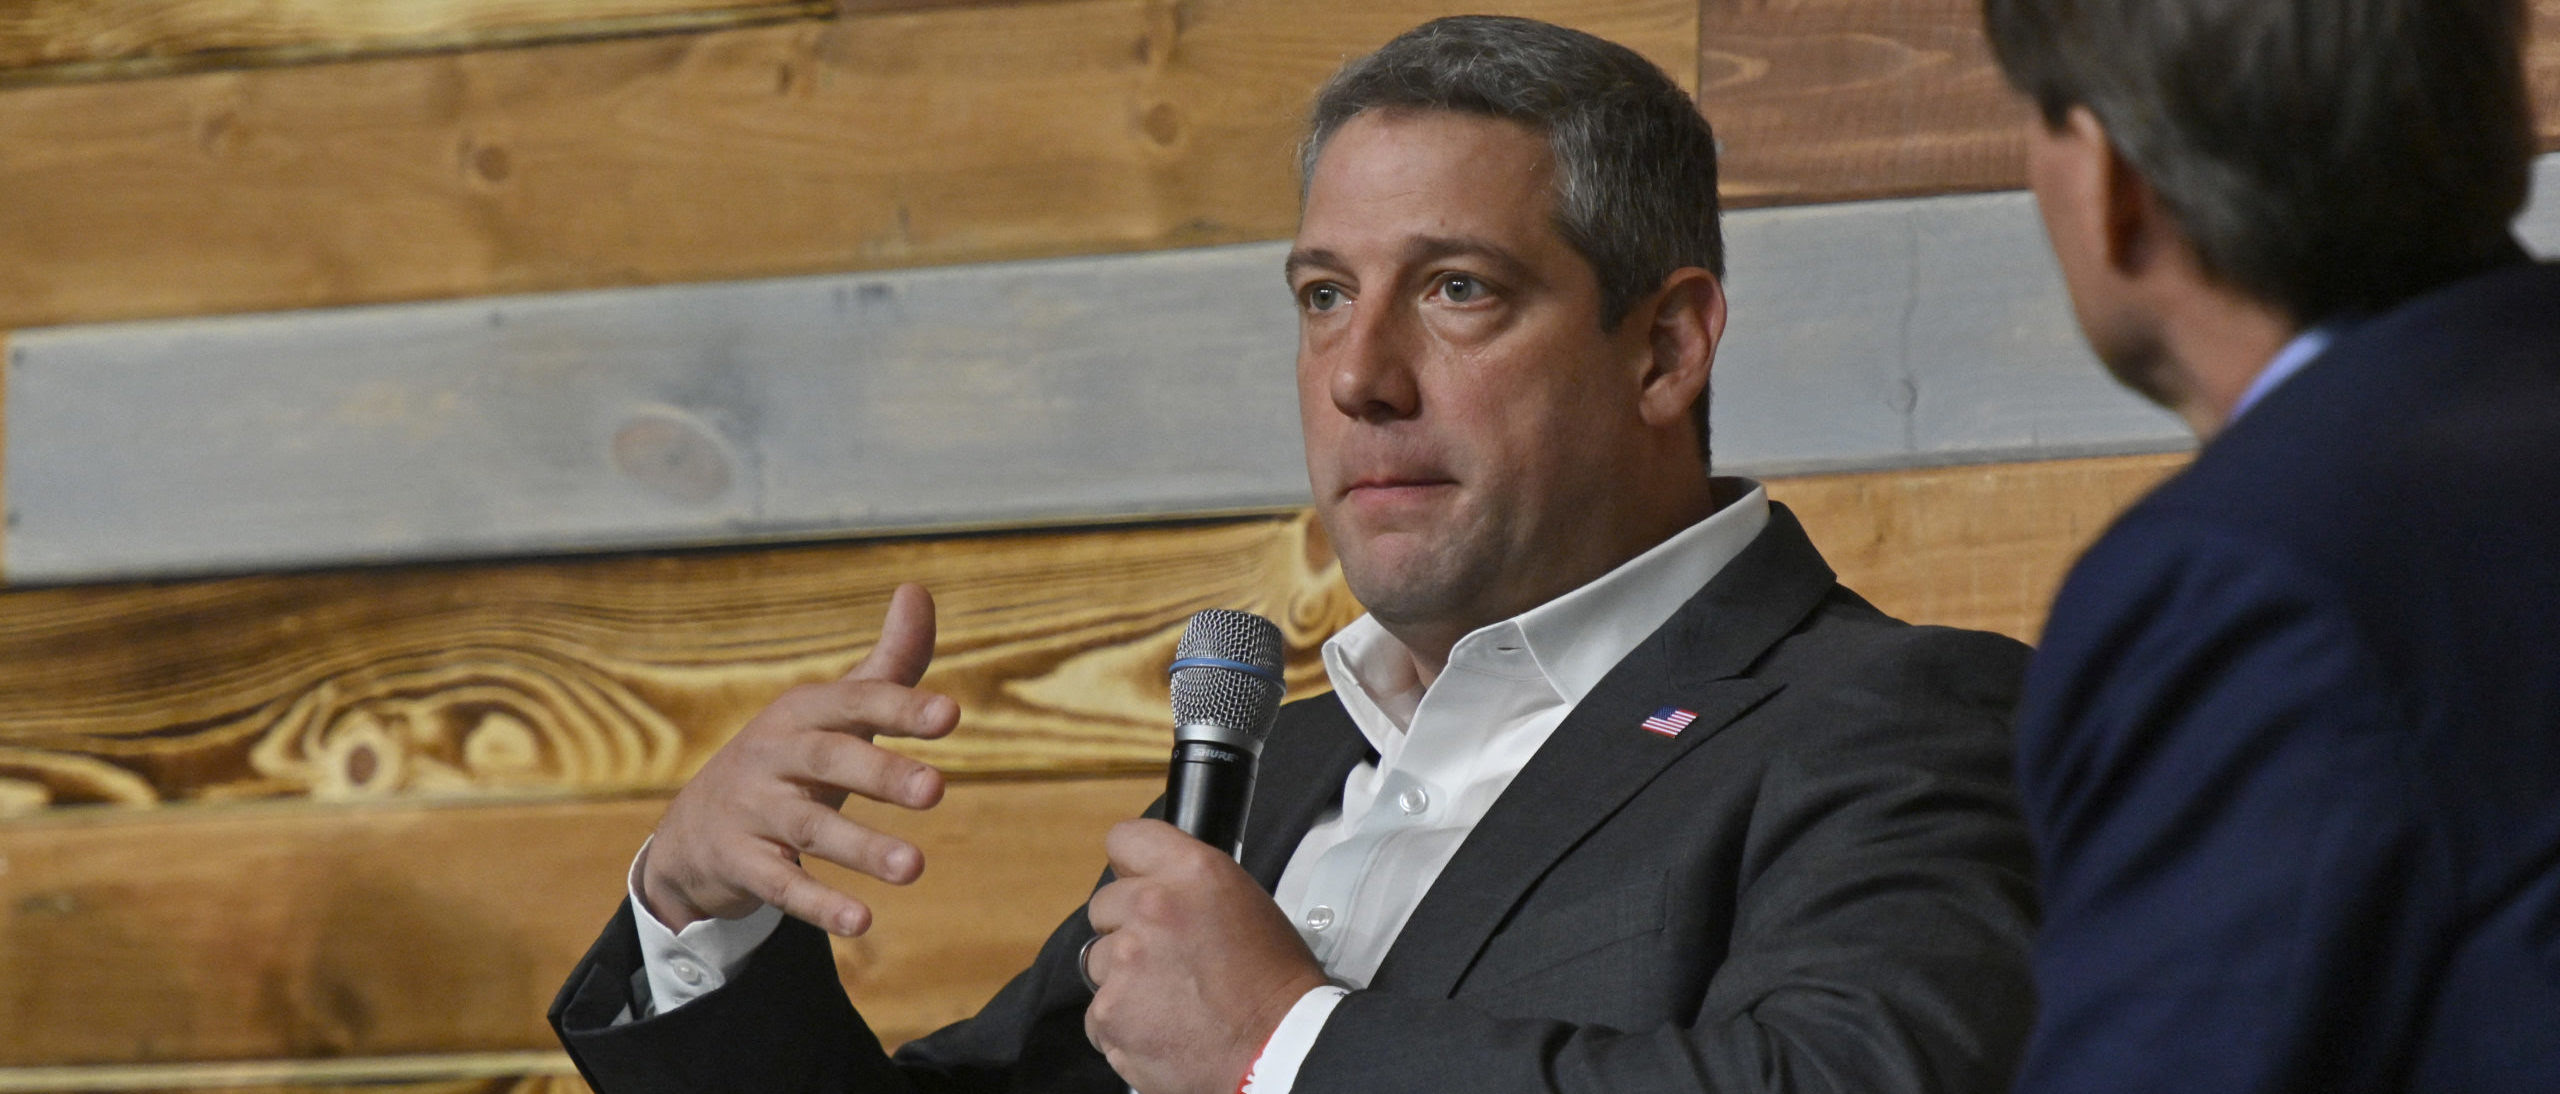 Tim Ryan, Former Democratic Candidate For President, Focuses On One Big Issue Trump Always Talked About In New Campaign Ad